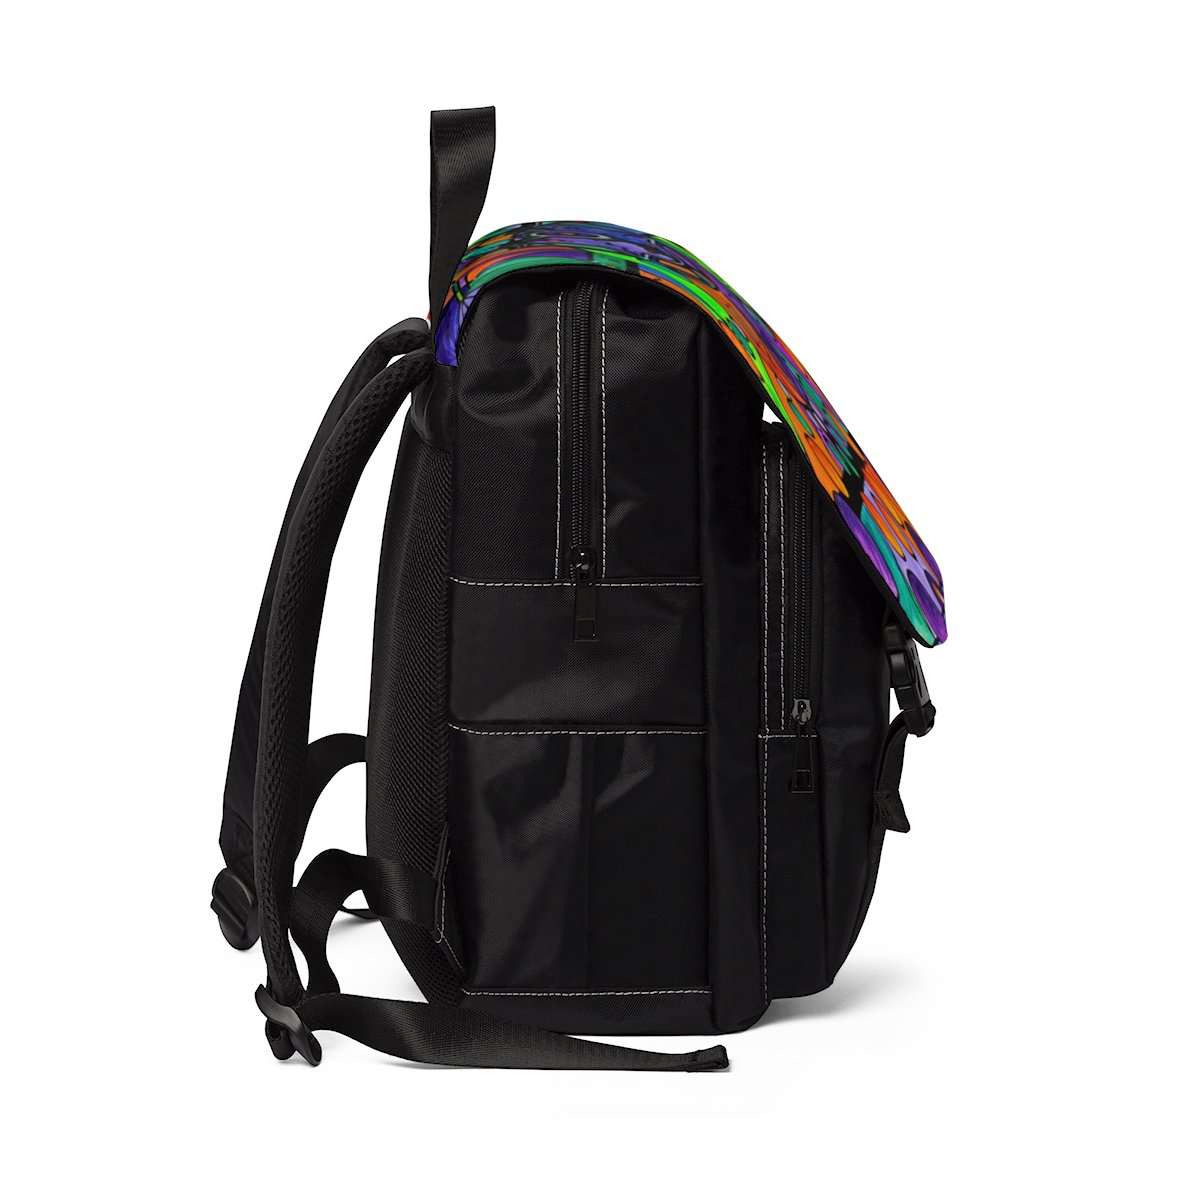 a-place-for-all-your-needs-to-buy-the-sheaf-pleiadian-lightwork-model-unisex-casual-shoulder-backpack-sale_1.jpg